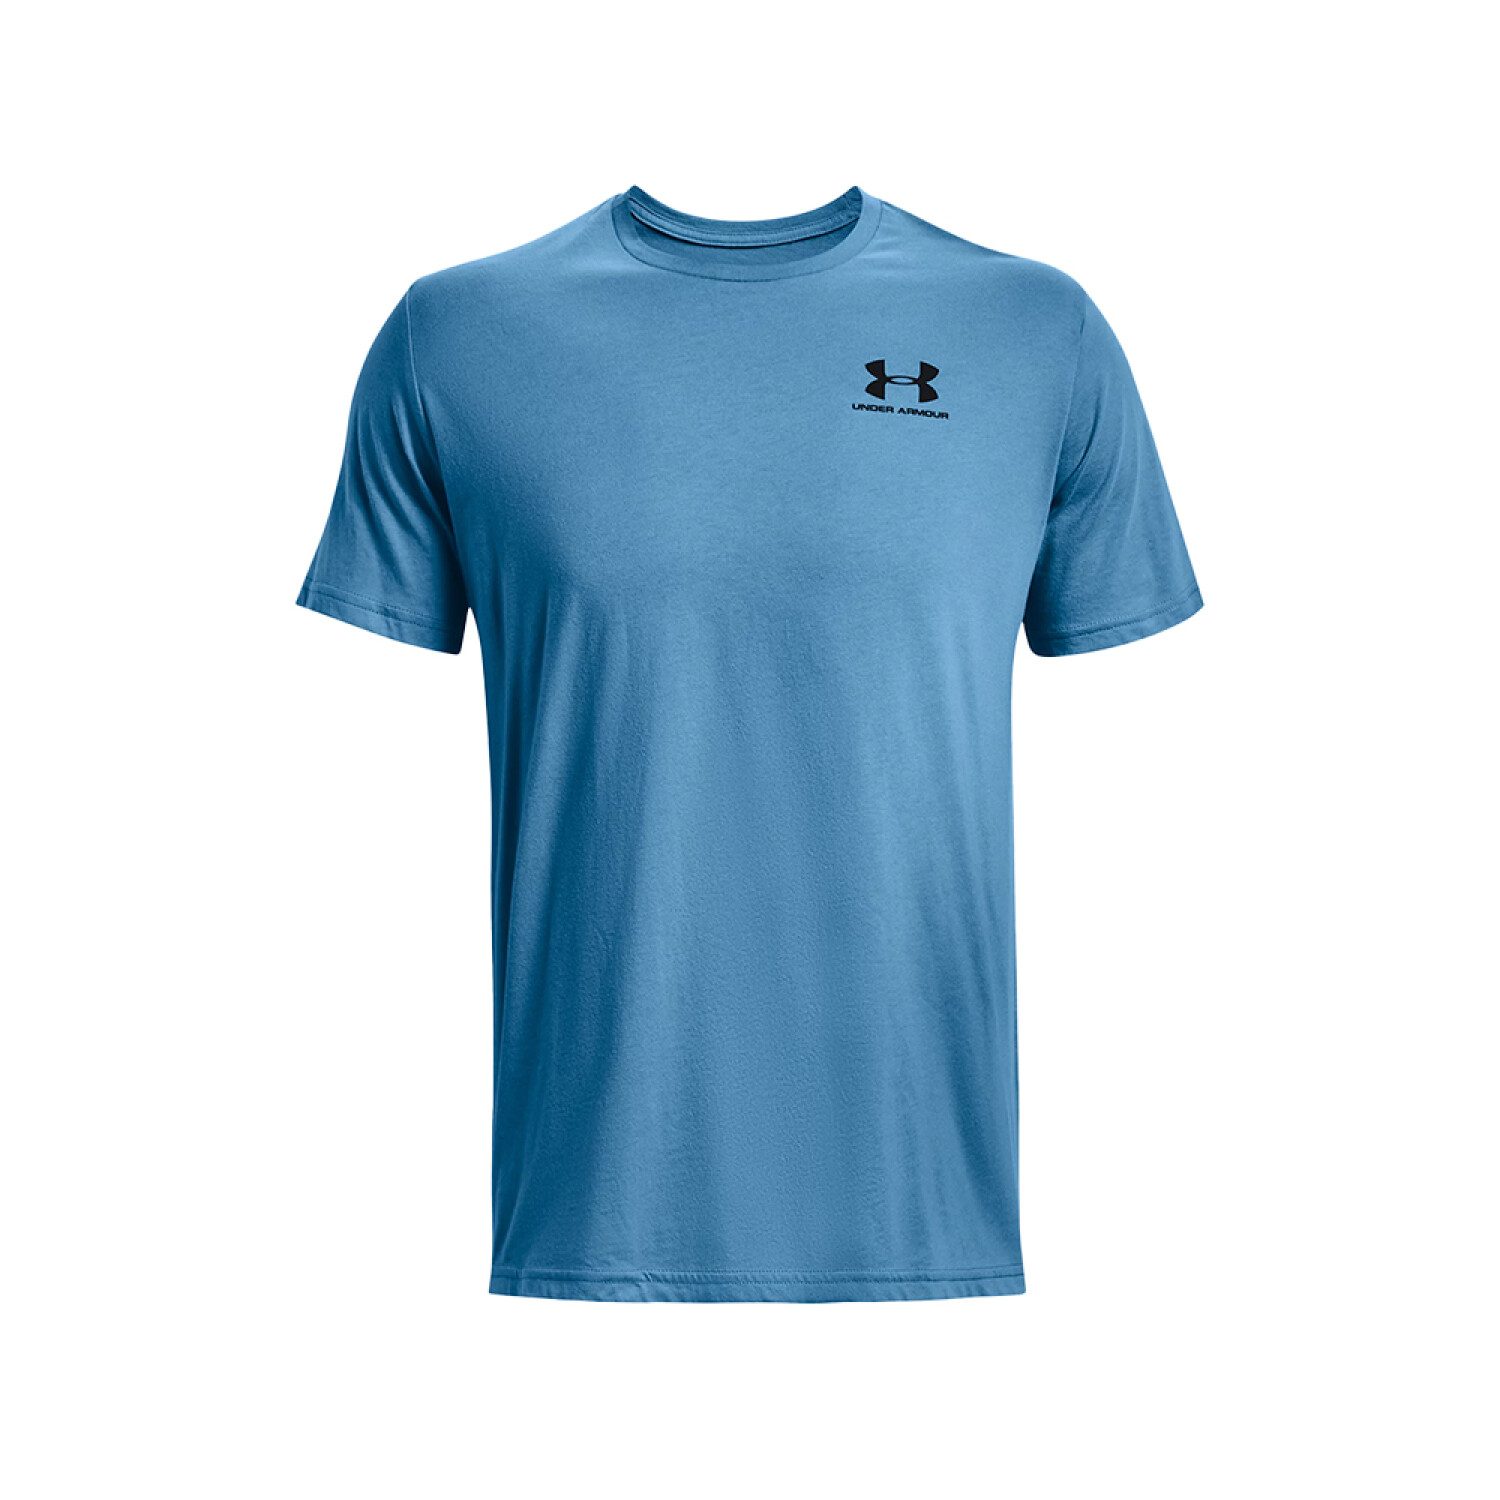 Remera Under Armour Sporstyle Lc